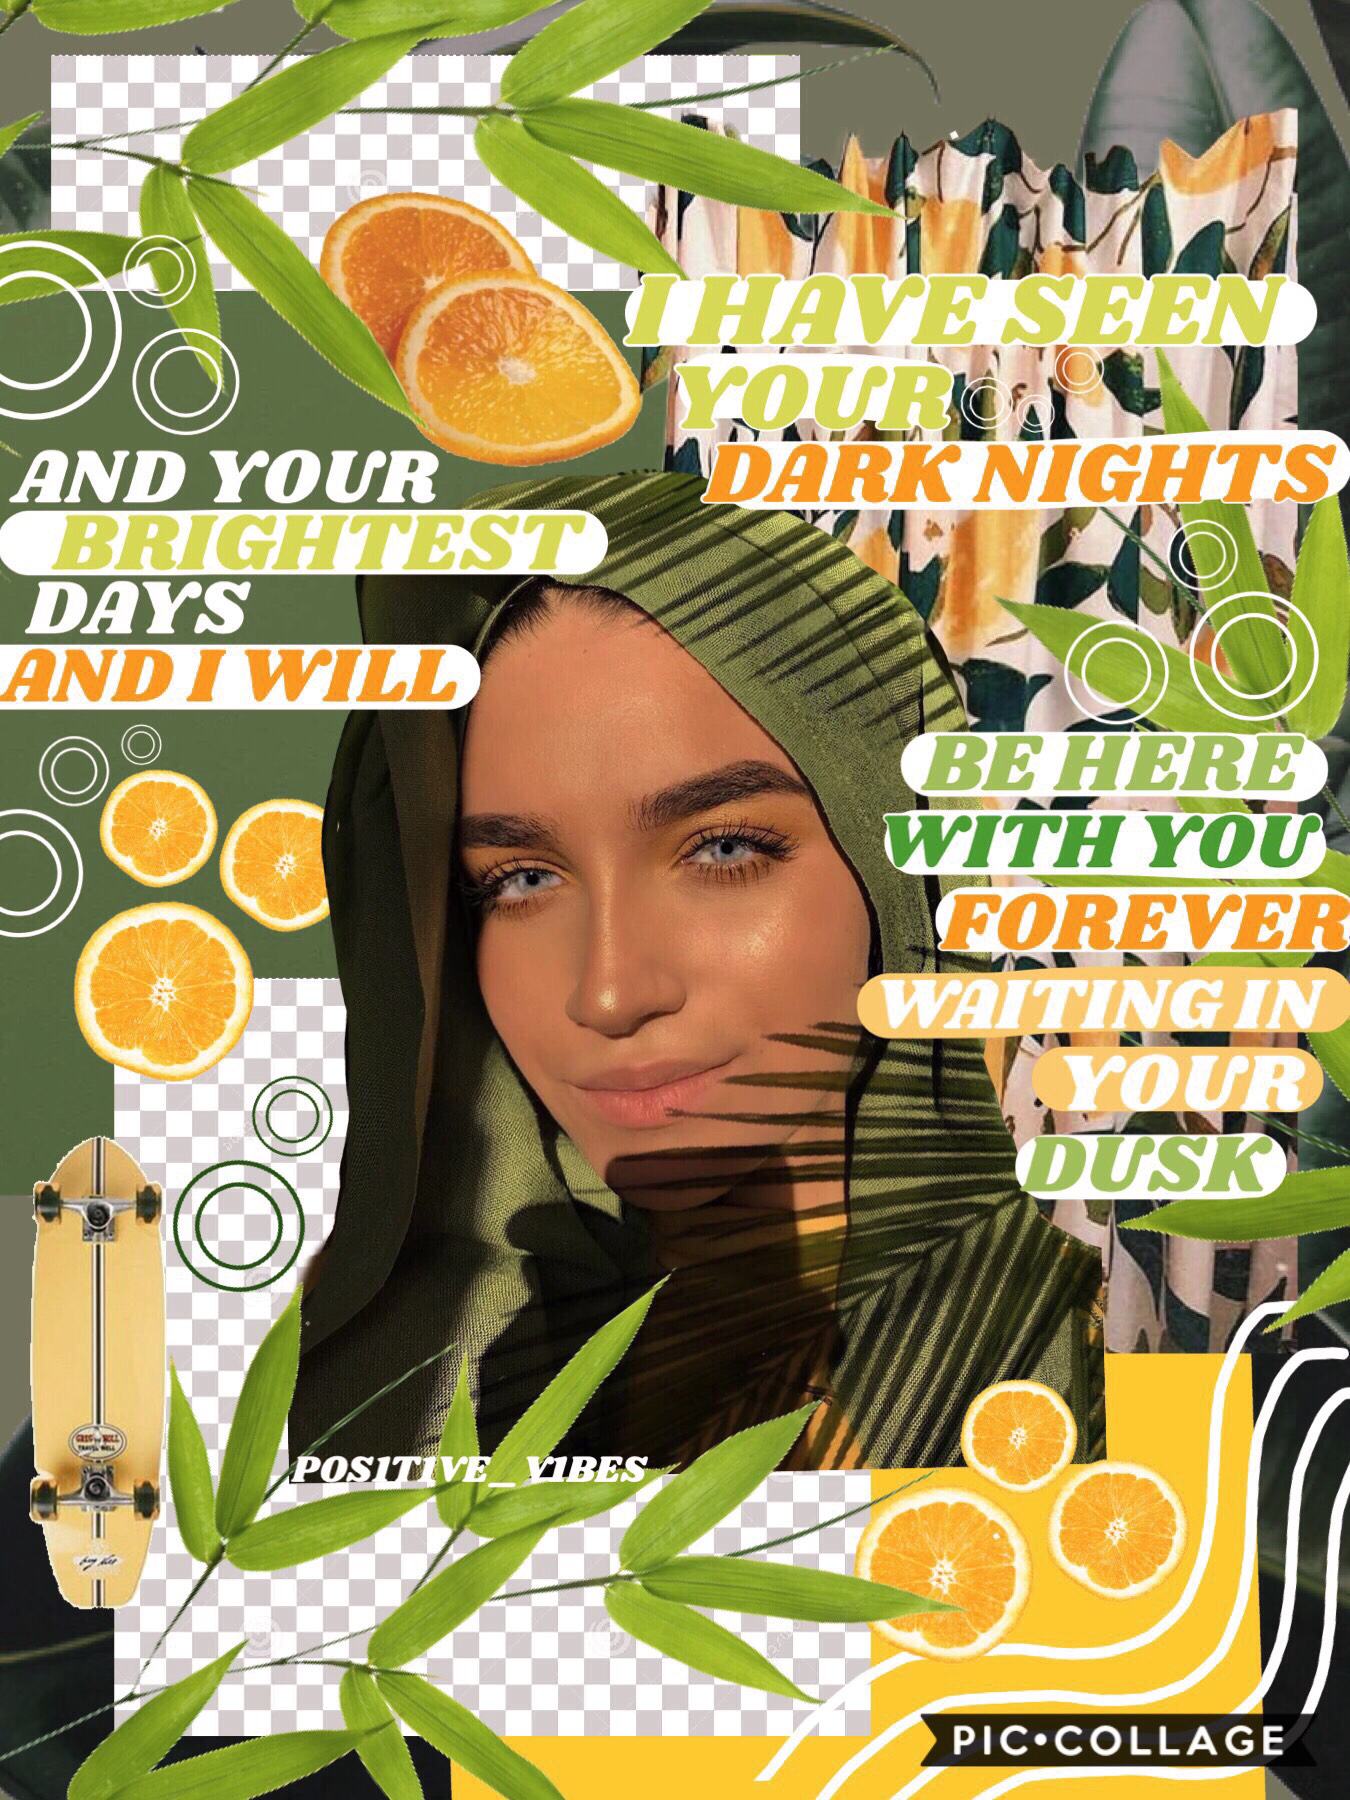 🍋finally a collage :)🍋my family stayed up till 2AM last night watching movies on Netflix & i’m so tired lol🍋PC kept on crashing on me making this edit,, it’s so fruSTRATING like wth🍋
#PCONLY
#QUOTES
#COLLAGE
#NETFLIX
#PCEDITS
#CRASHING
#LEMONS
#WTHAMI
#TY